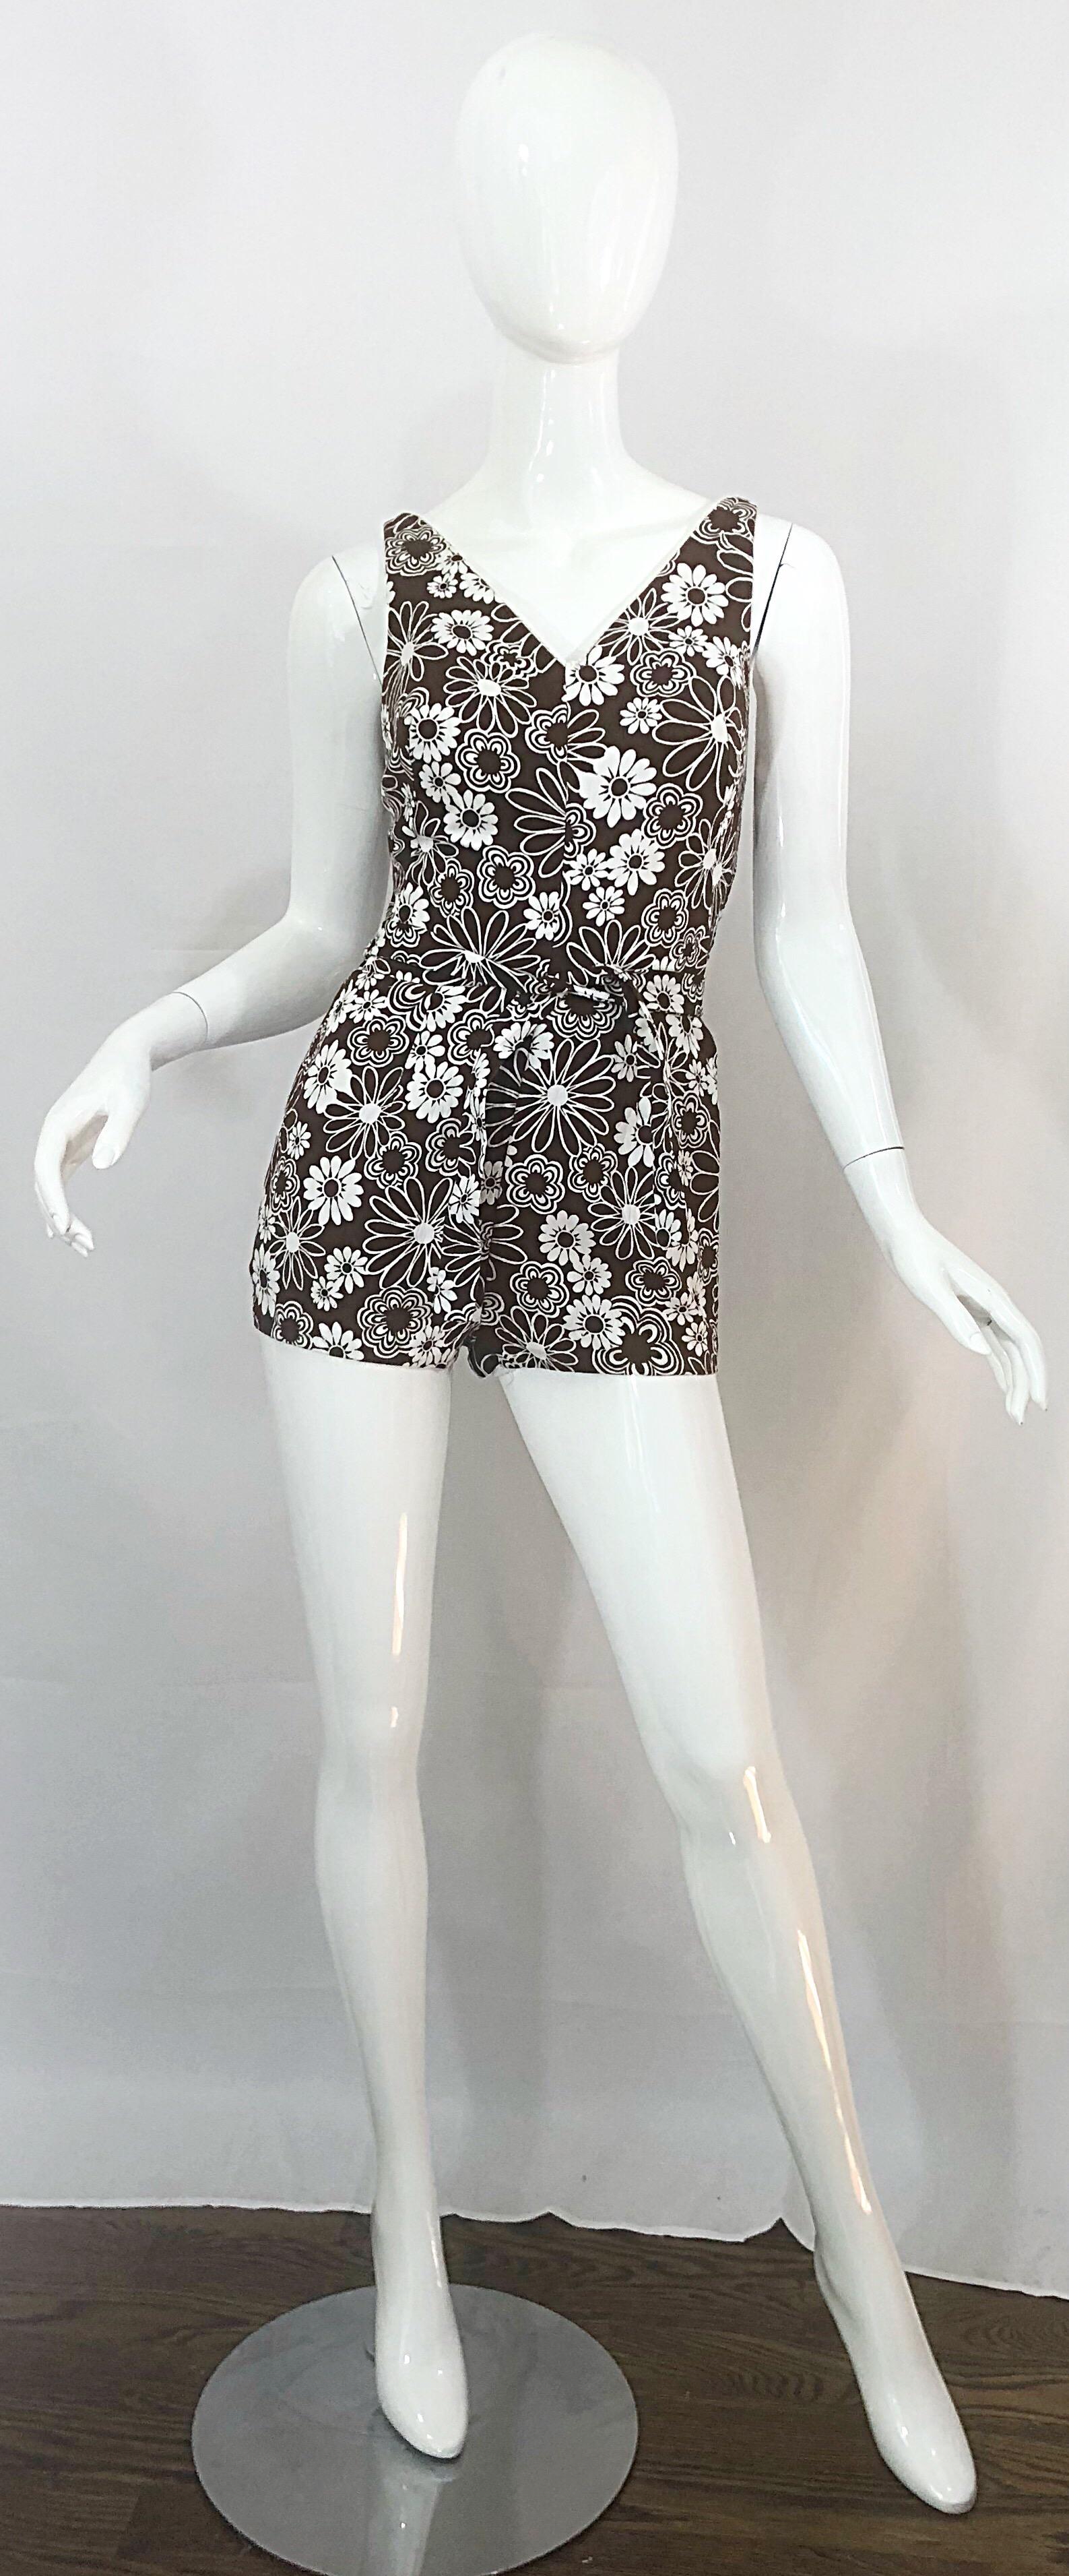 Chic 1960s Brown + White Belted One Piece Romper Swimsuit Vintage 60s Playsuit 8